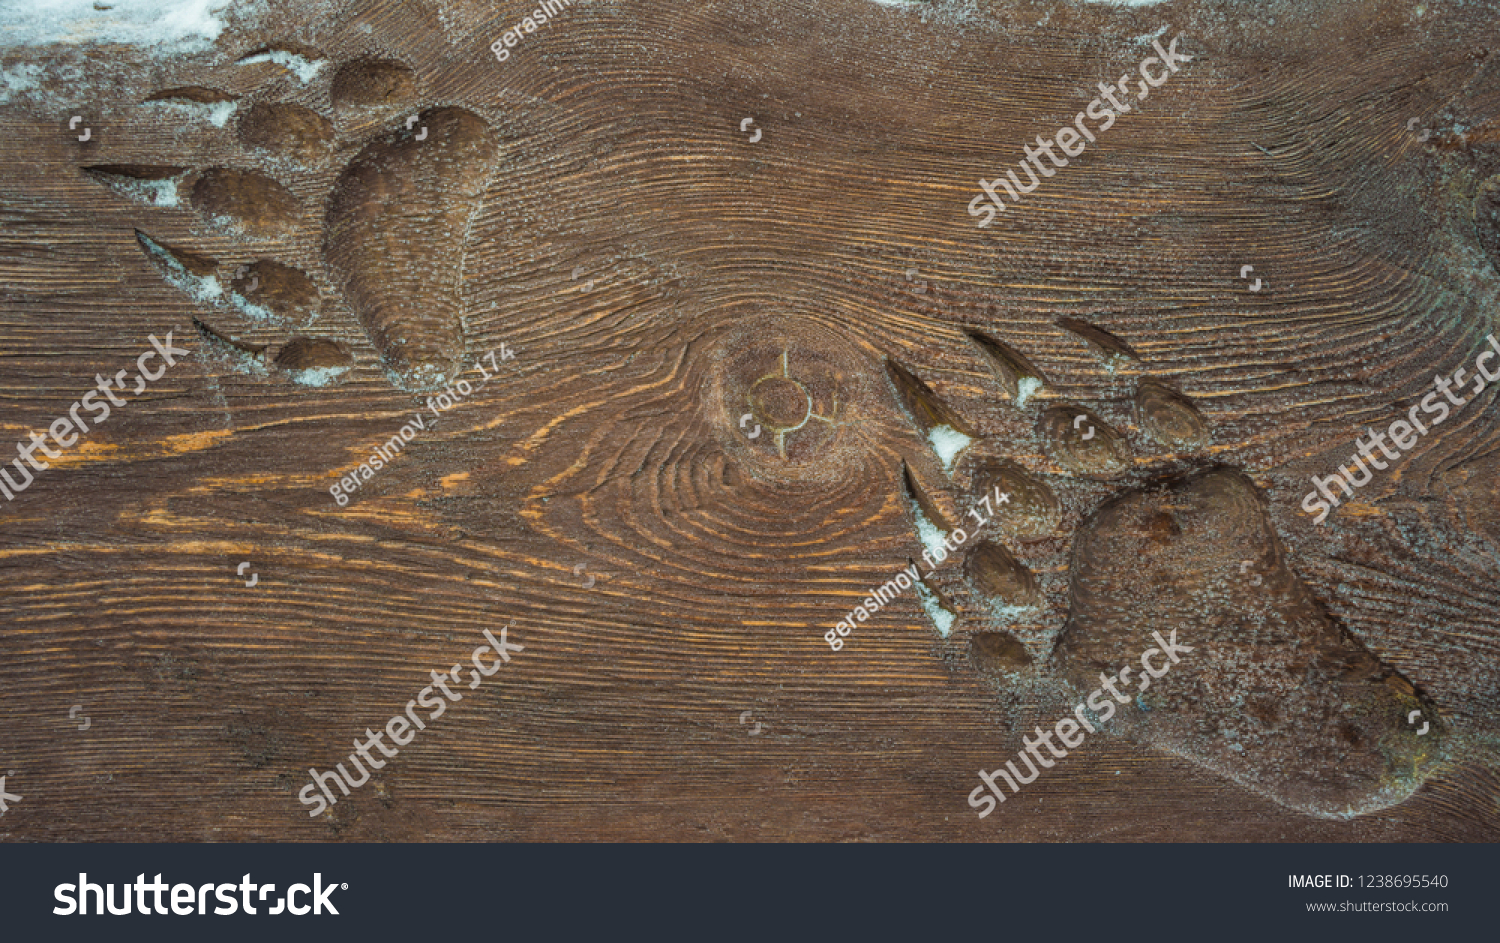 Animal footprint on the wooden surface of a bear. #1238695540